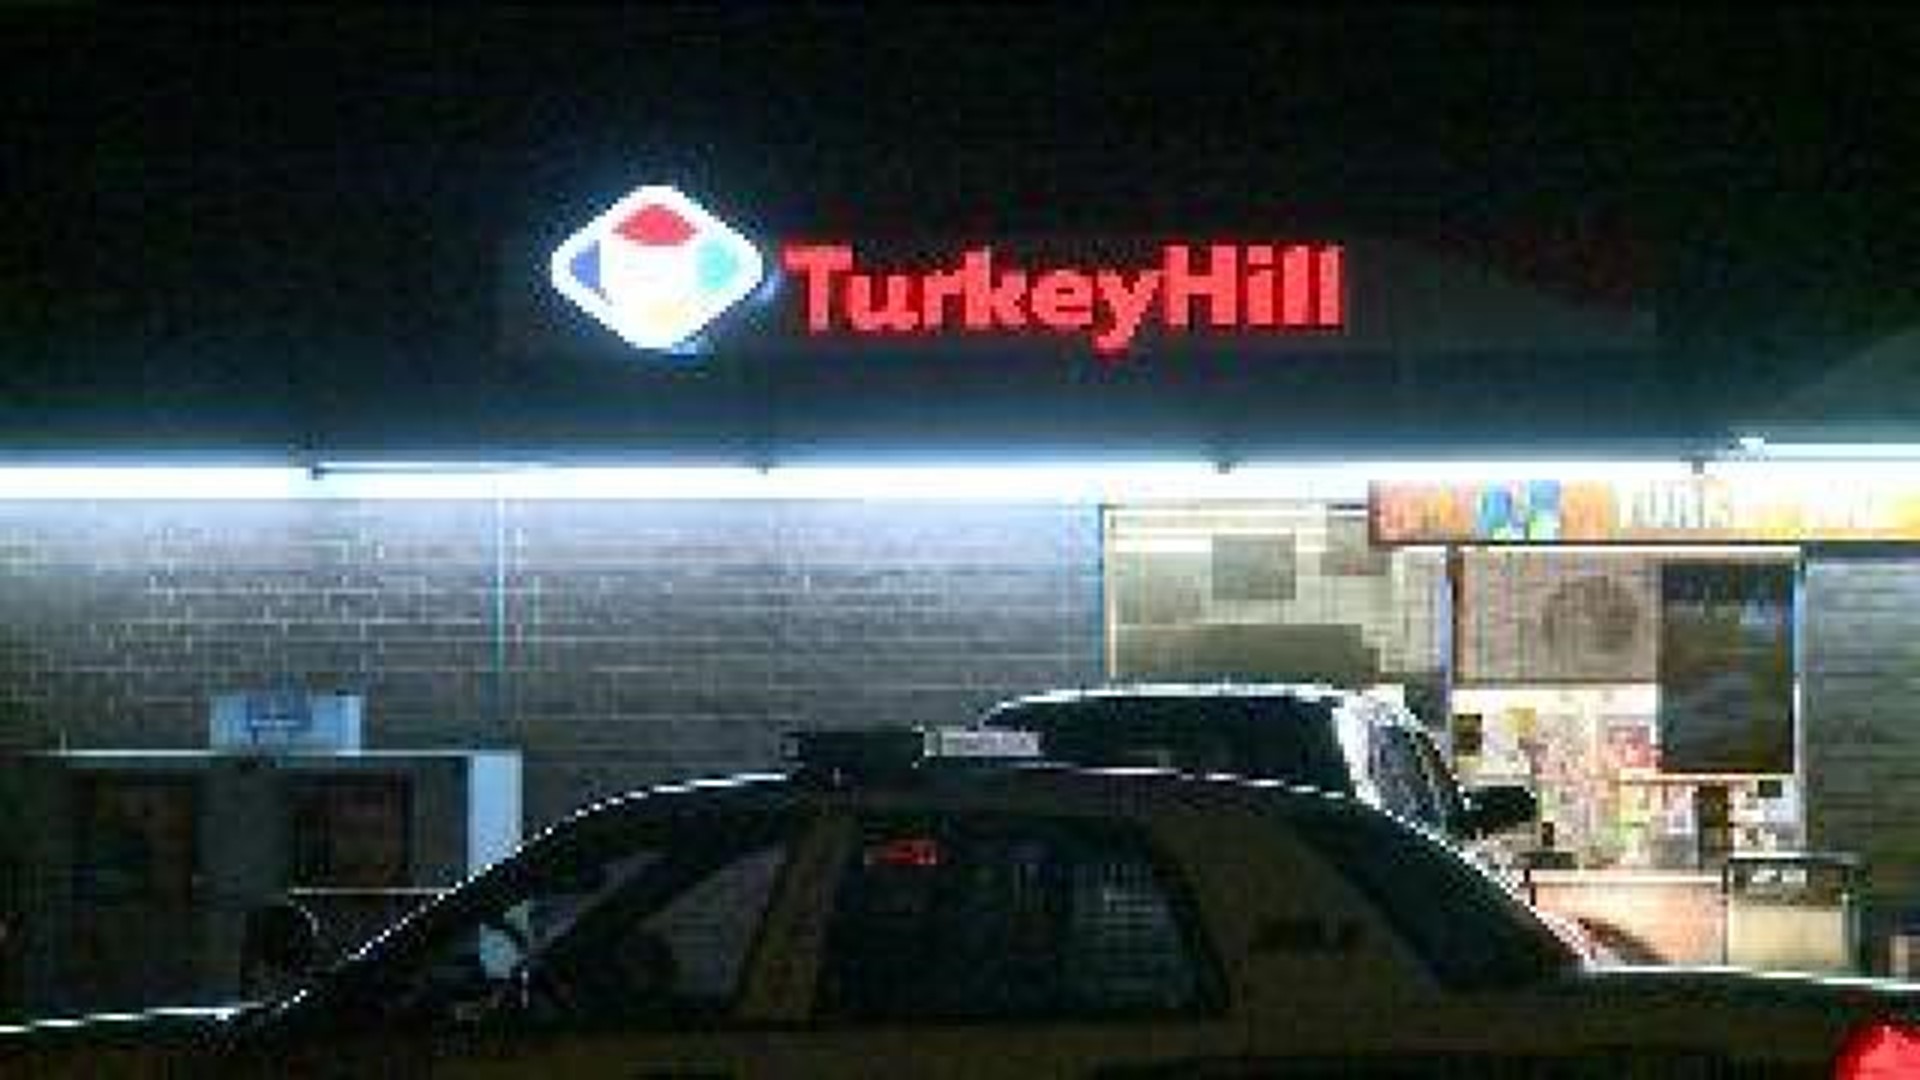 Turkey Hill Robbed for Second Time in Six Days